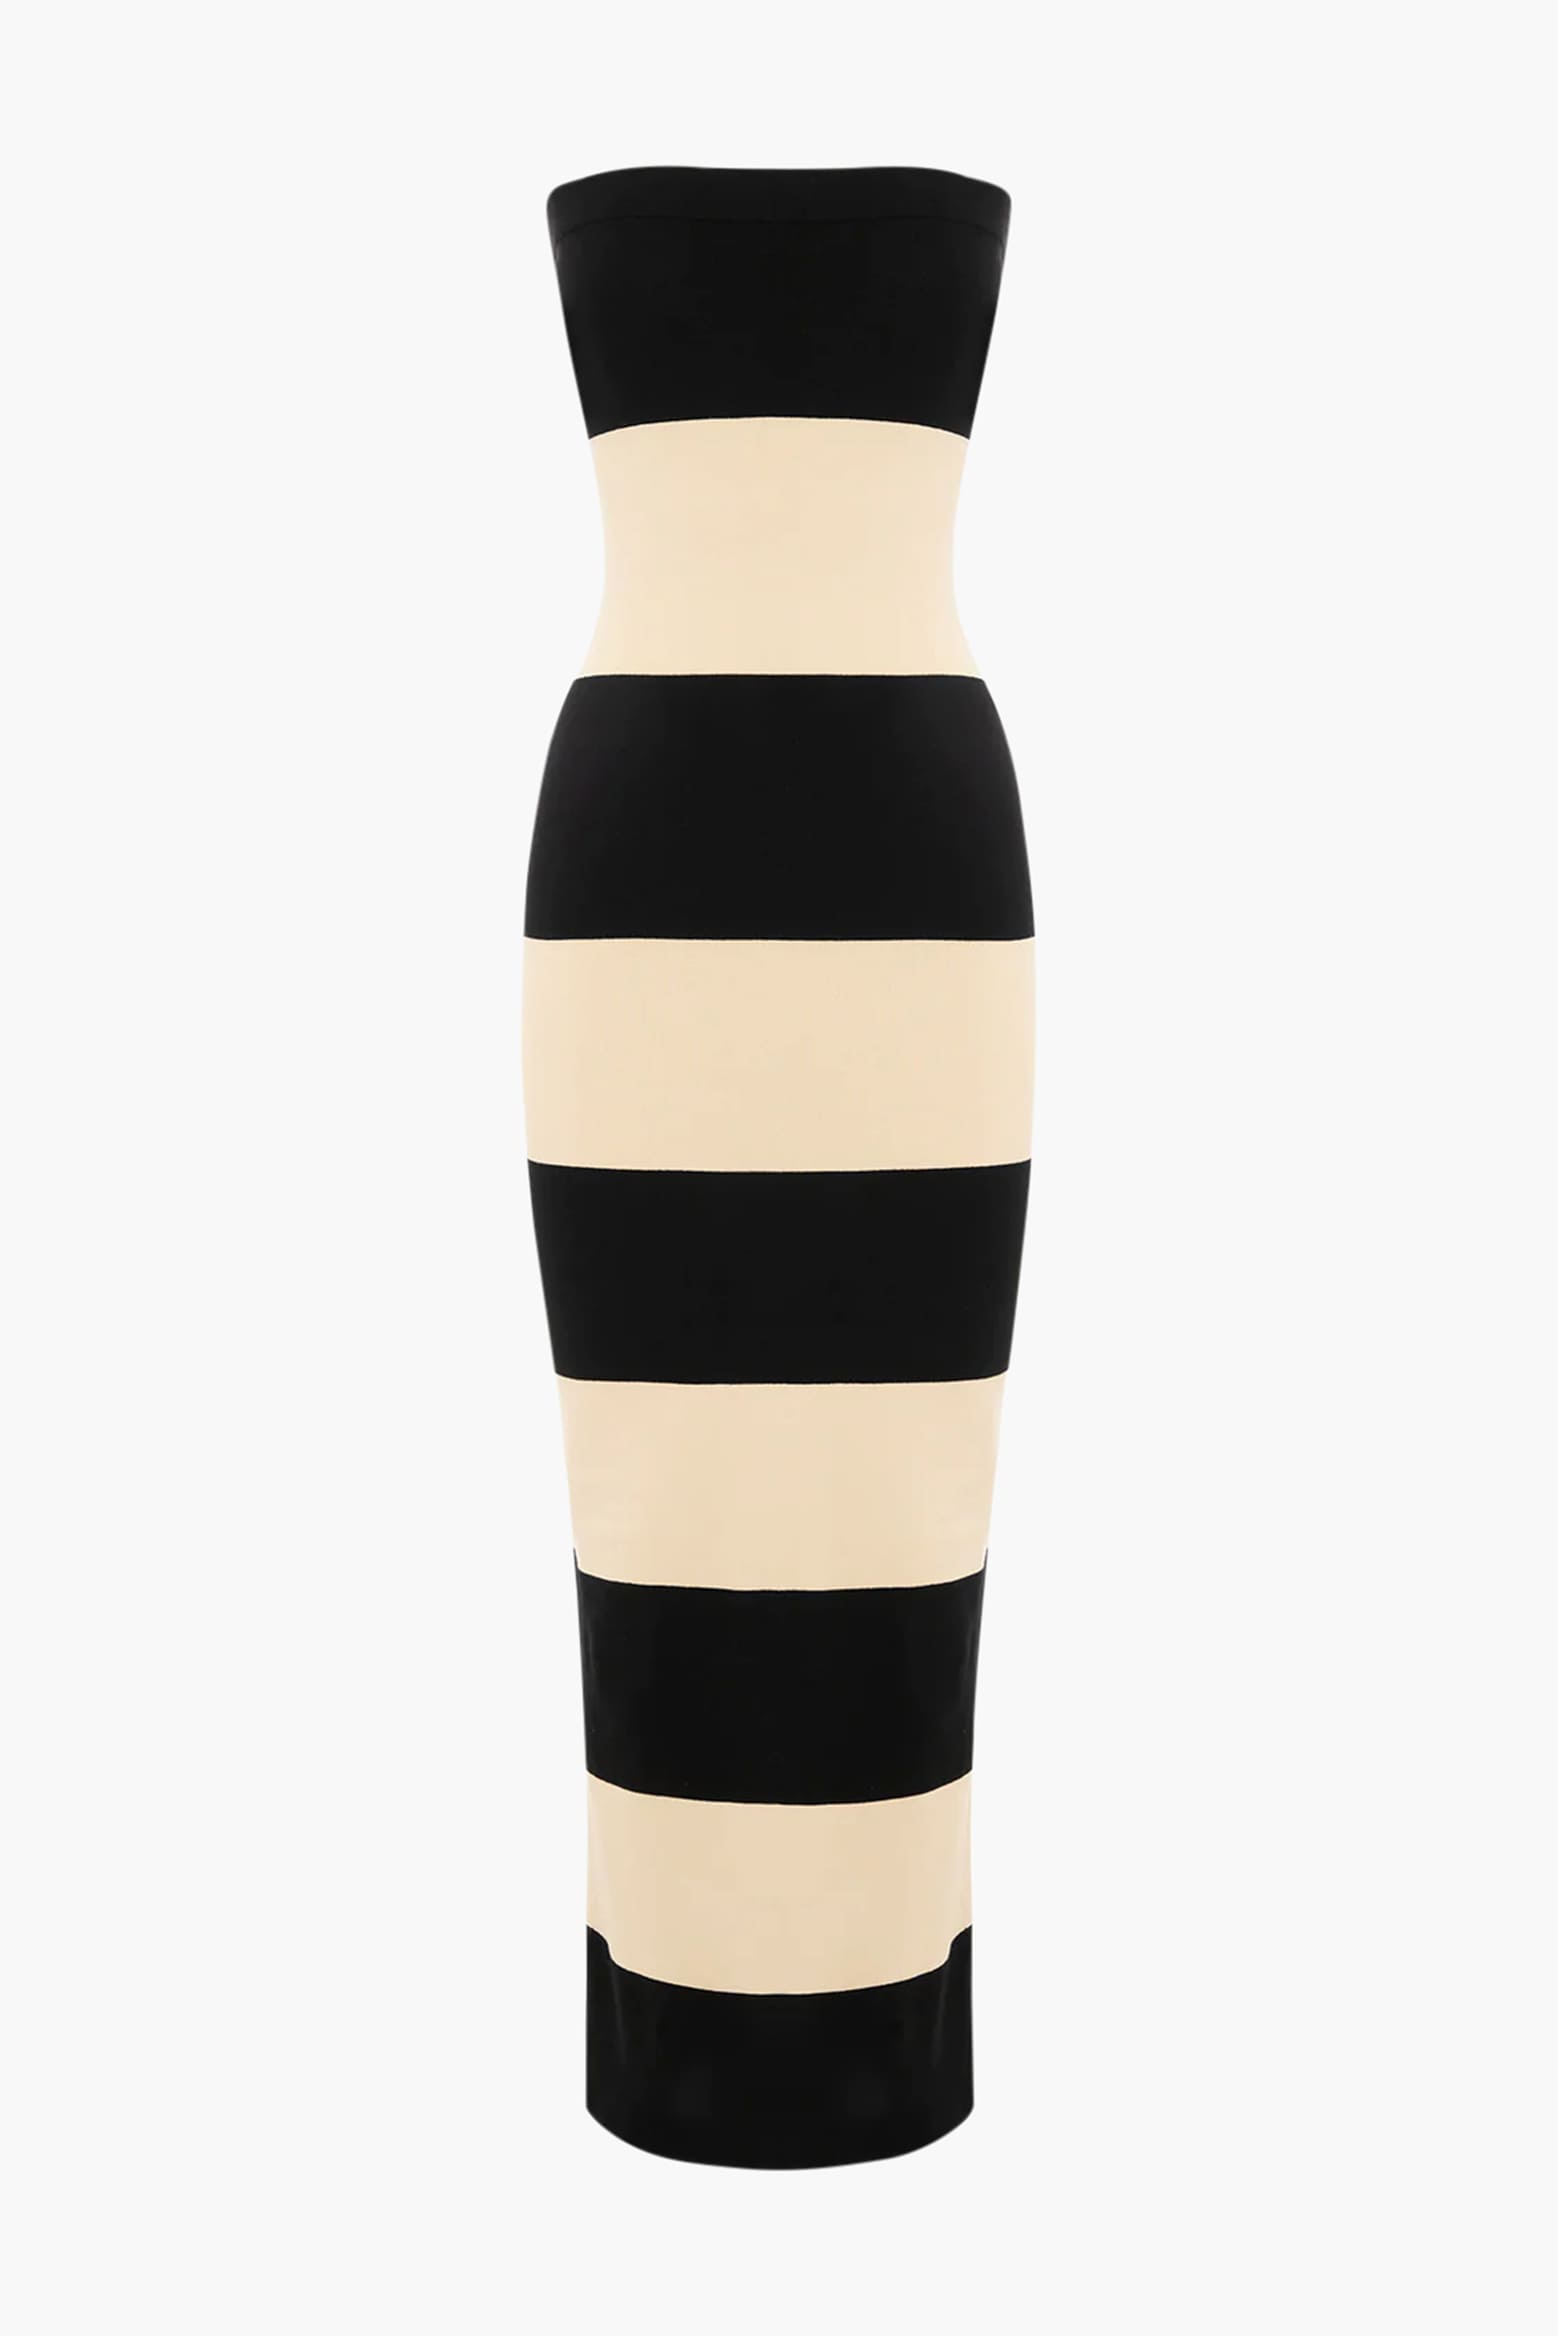 Posse Theo Strapless Dress in Bone and Black available at The New Trend Australia.